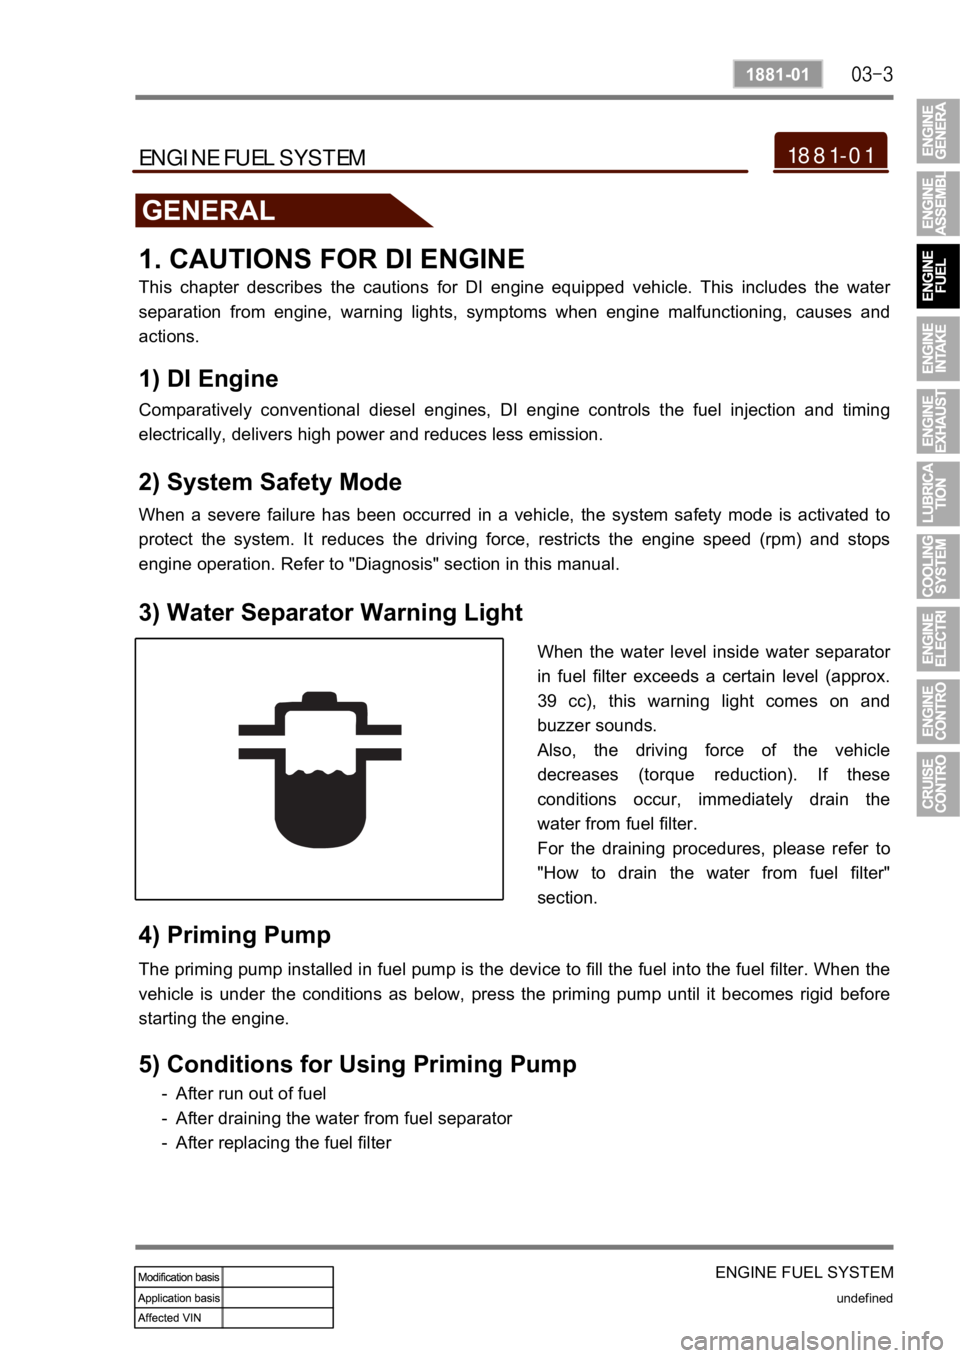 SSANGYONG KYRON 2008  Service Manual ENGINE FUEL SYSTEM
undefined
1881-01
1881-01ENGINE FUEL SYSTEM
GENERAL
1. CAUTIONS FOR DI ENGINE
This  chapter  describes  the  cautions  for  DI  engine  equipped  vehicle.  This  includes  the  wate